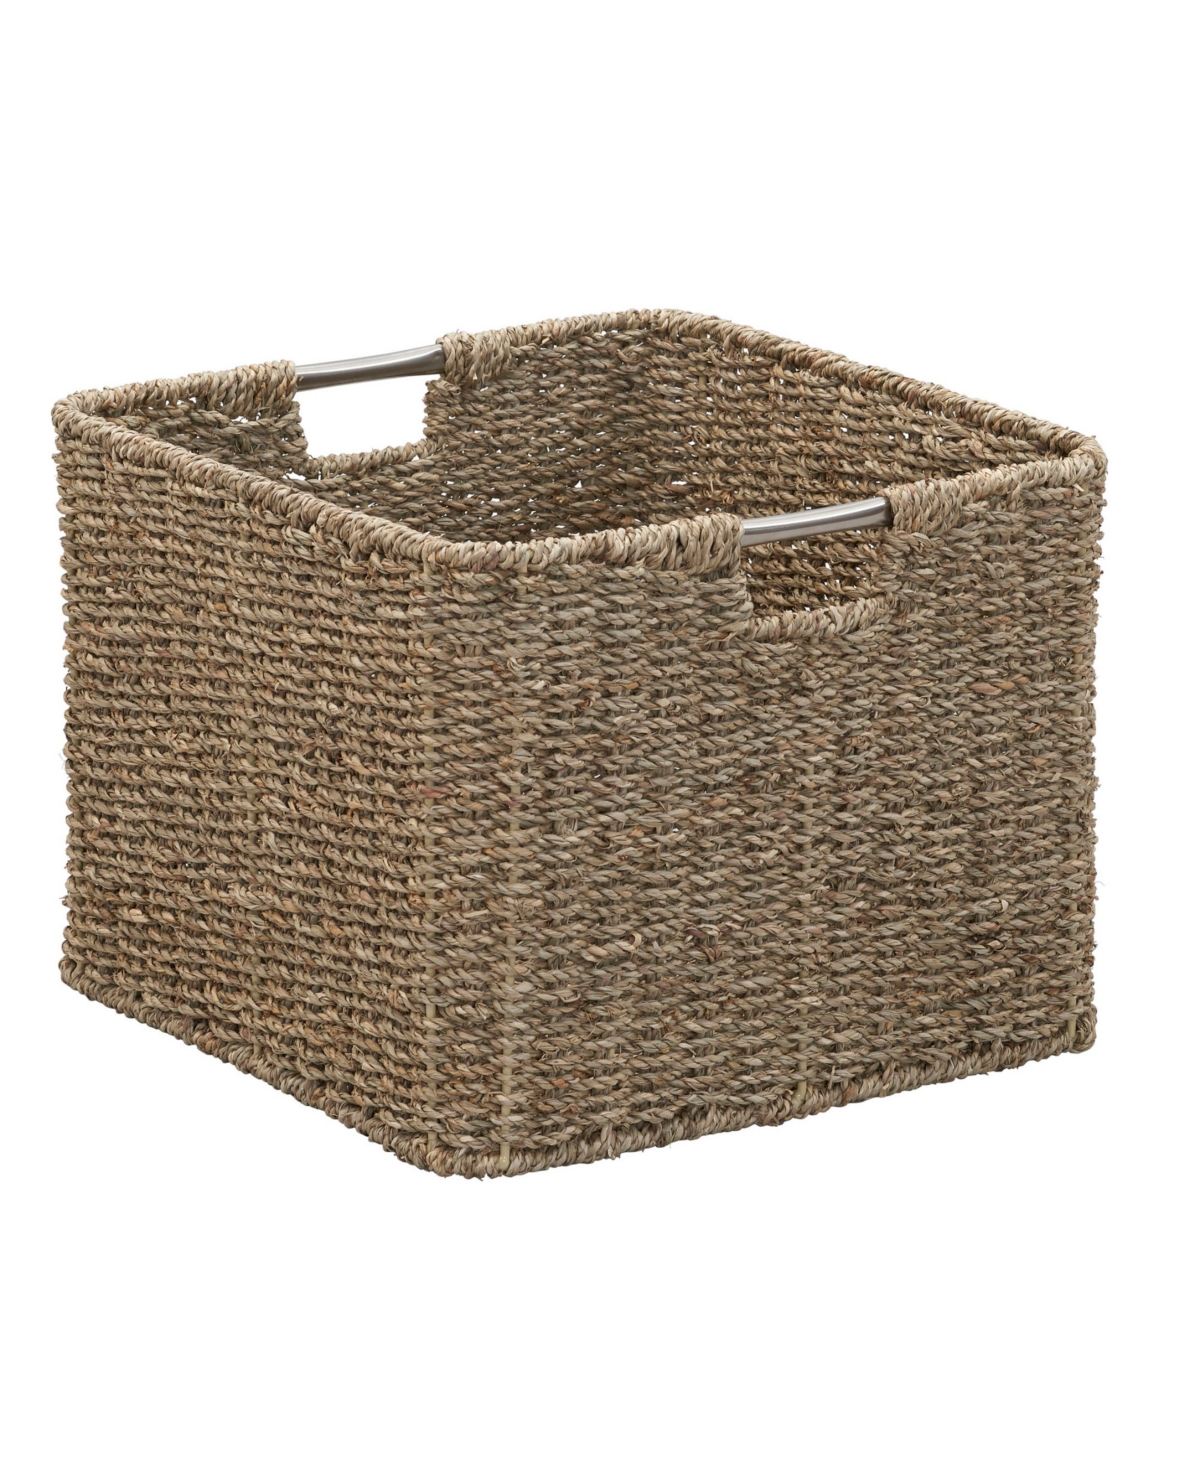 mDesign Woven Hyacinth Home Storage Basket for Cube Furniture, 4 Pack - Natural